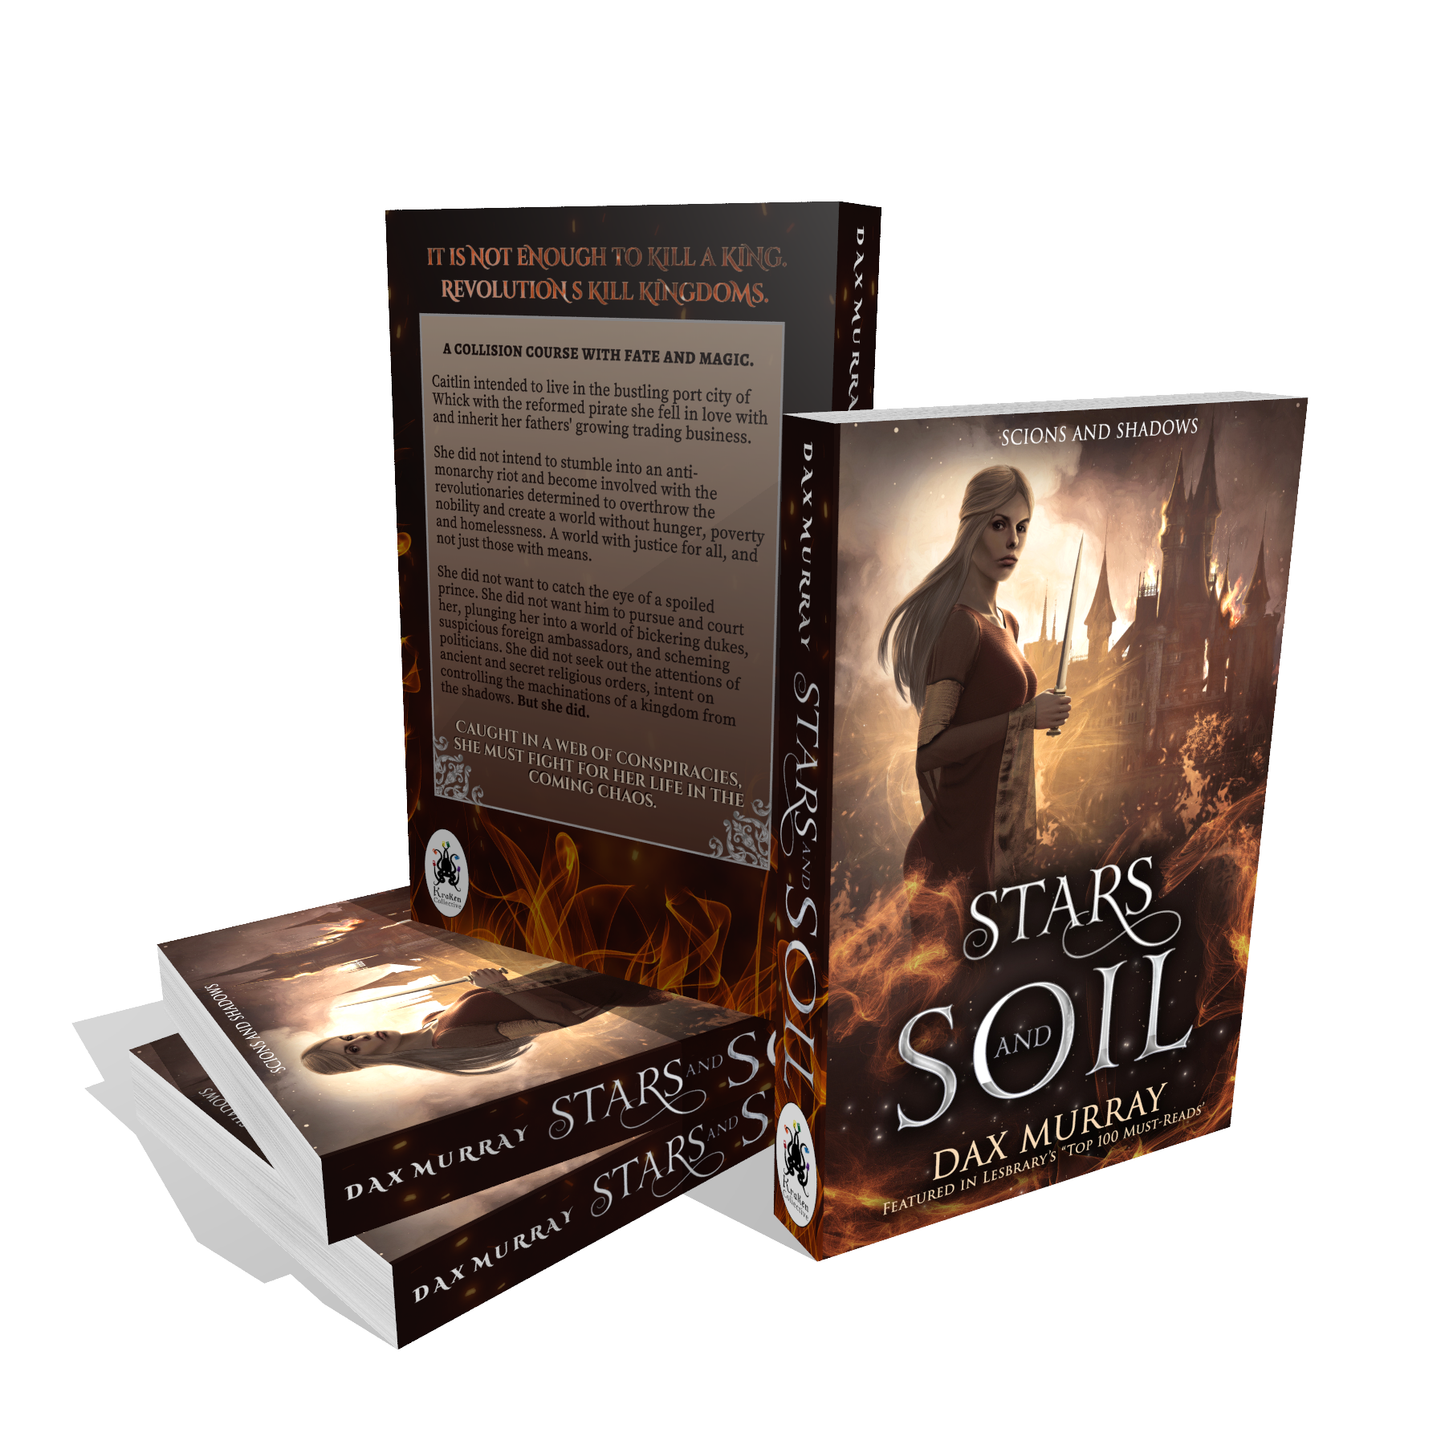 Stars and Soil - Special Edition Paperback